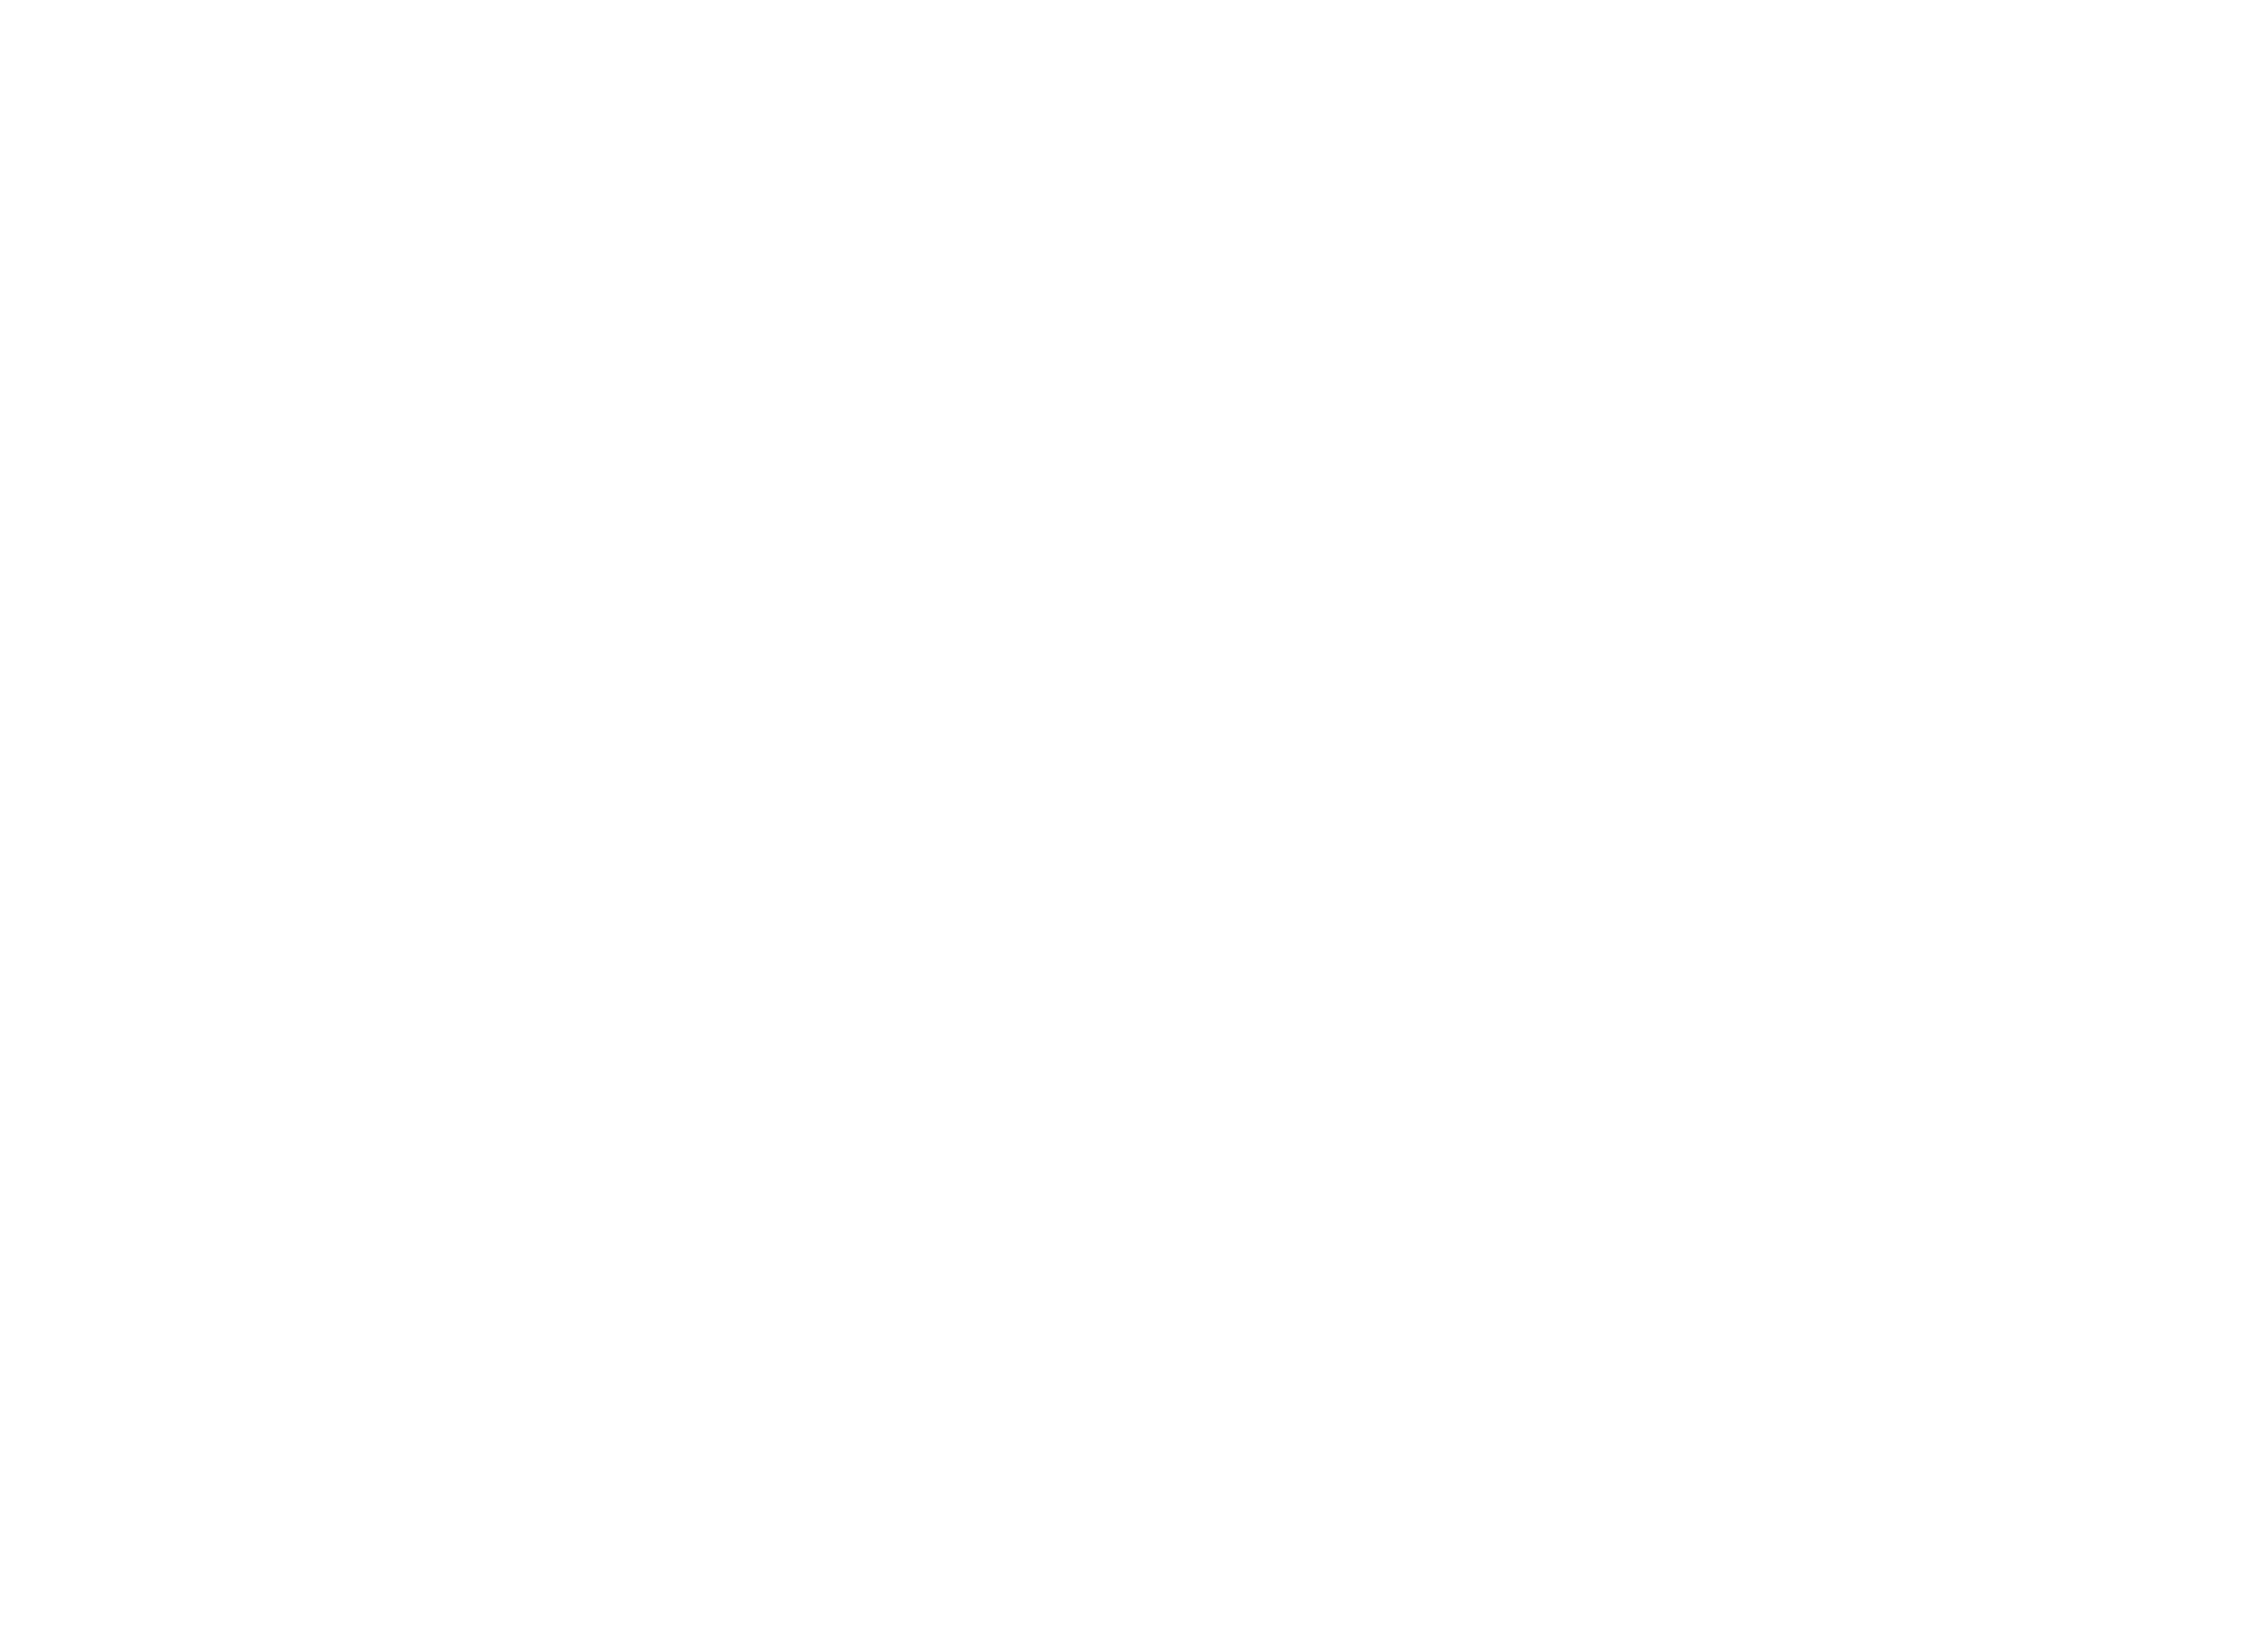 Up/Down Moving & Logistics - Red Bank